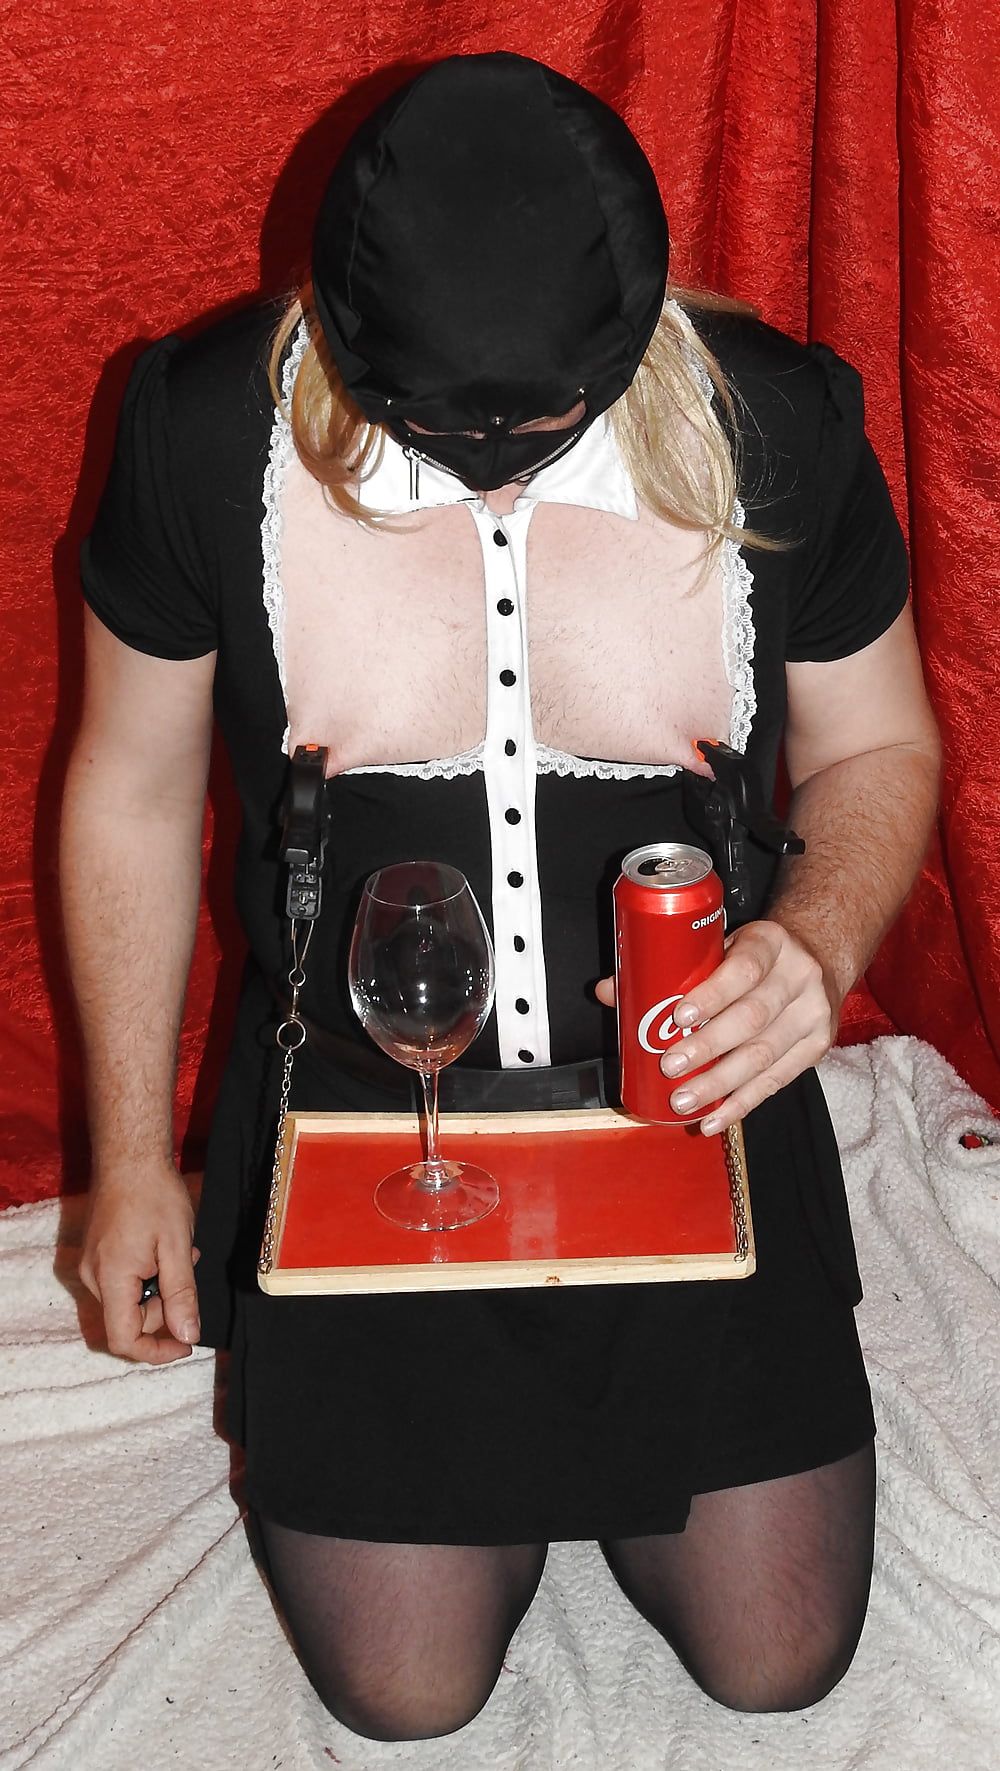 Sissy Served drinks by Glass